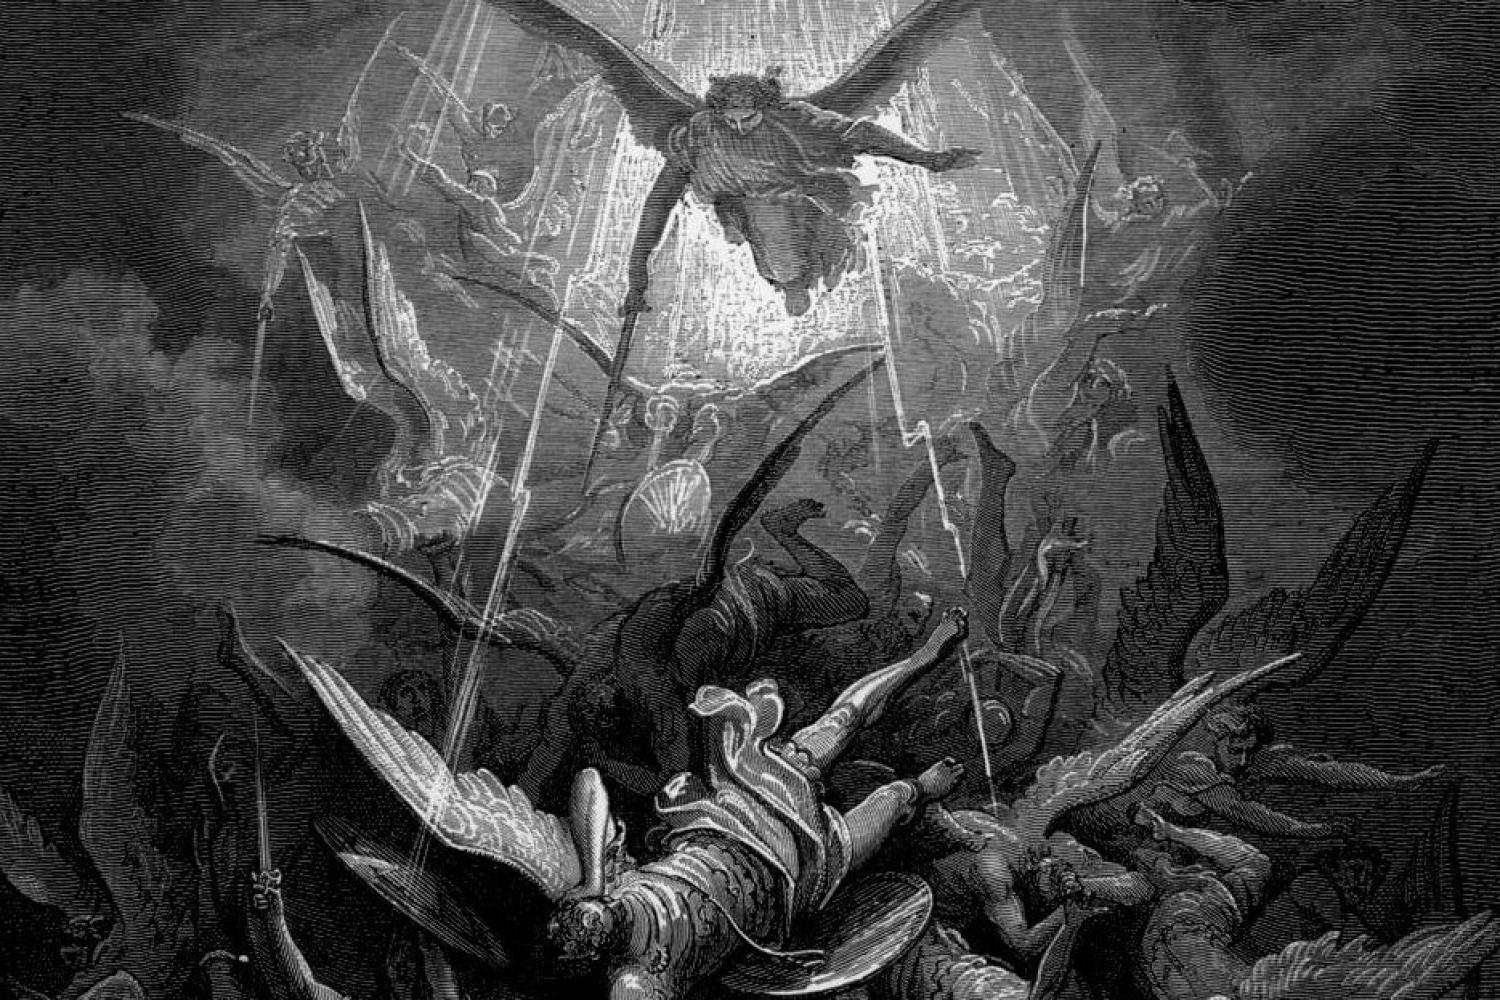 "Michael Casts Out All of the Fallen Angels," by Gustave Dore